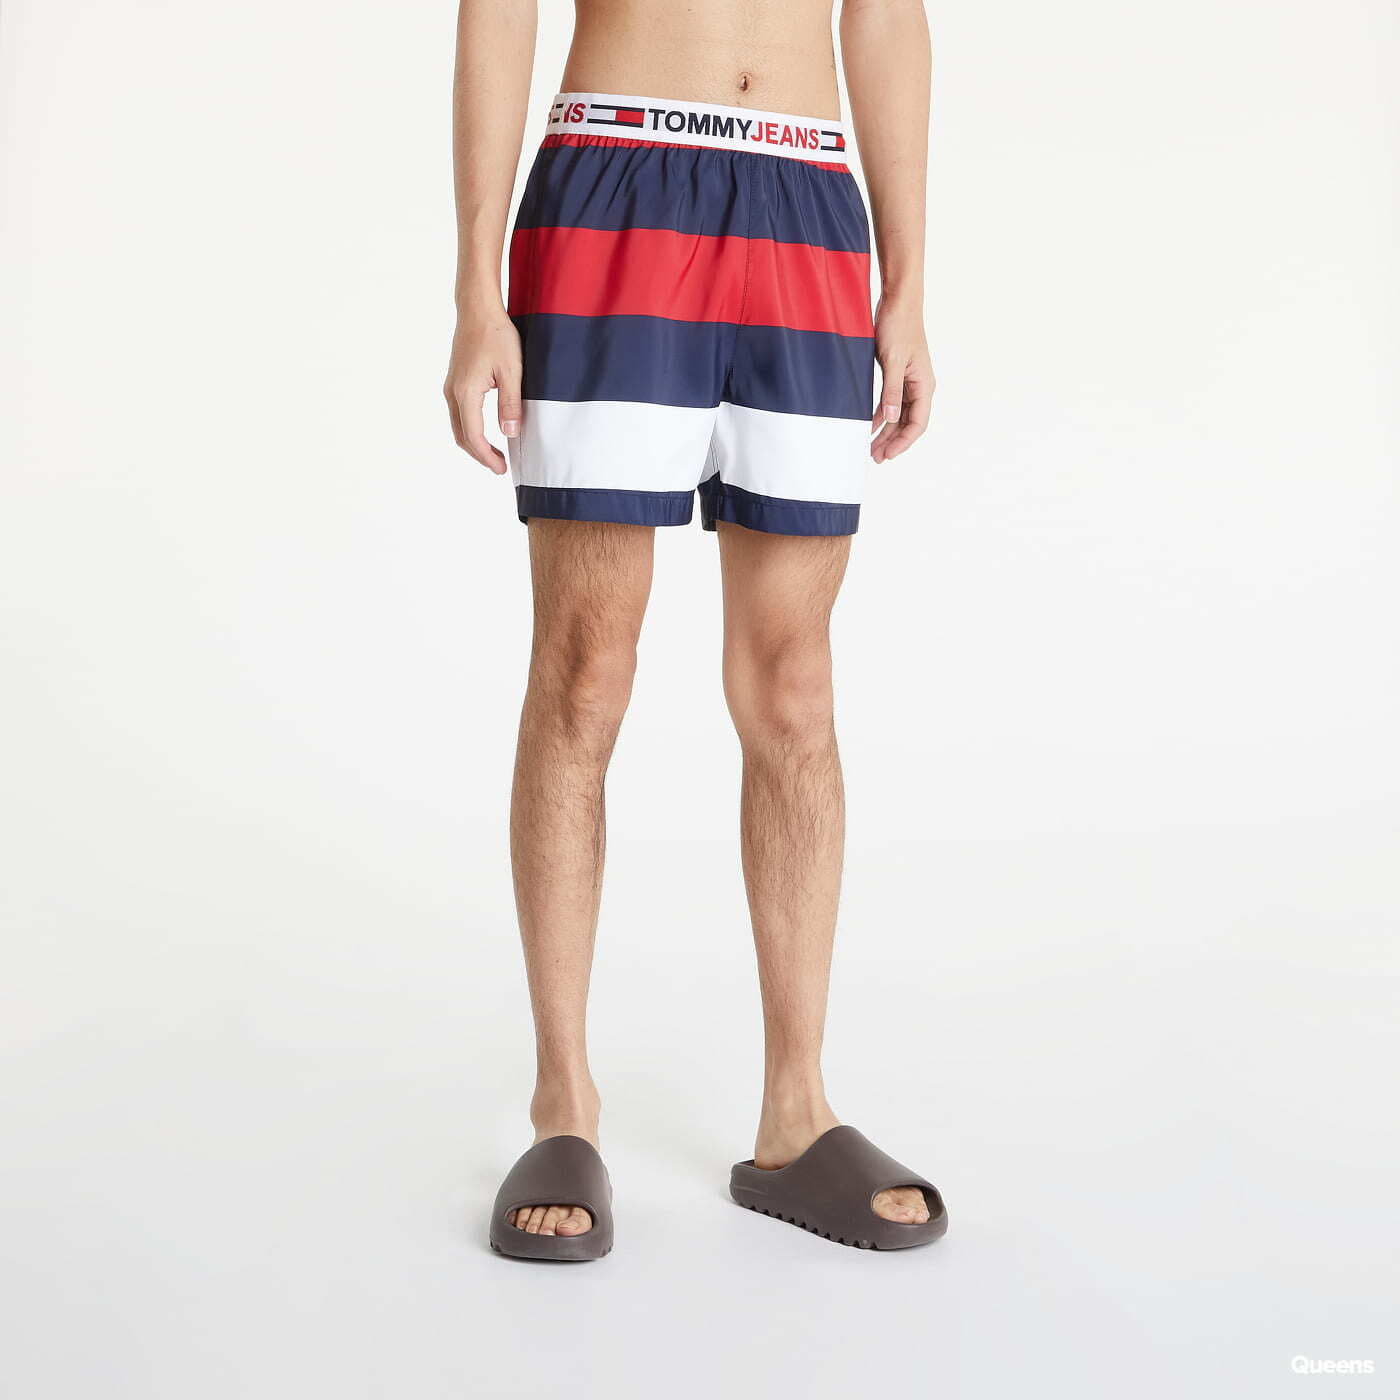 Swimsuit TOMMY JEANS Rugby Stride Navy